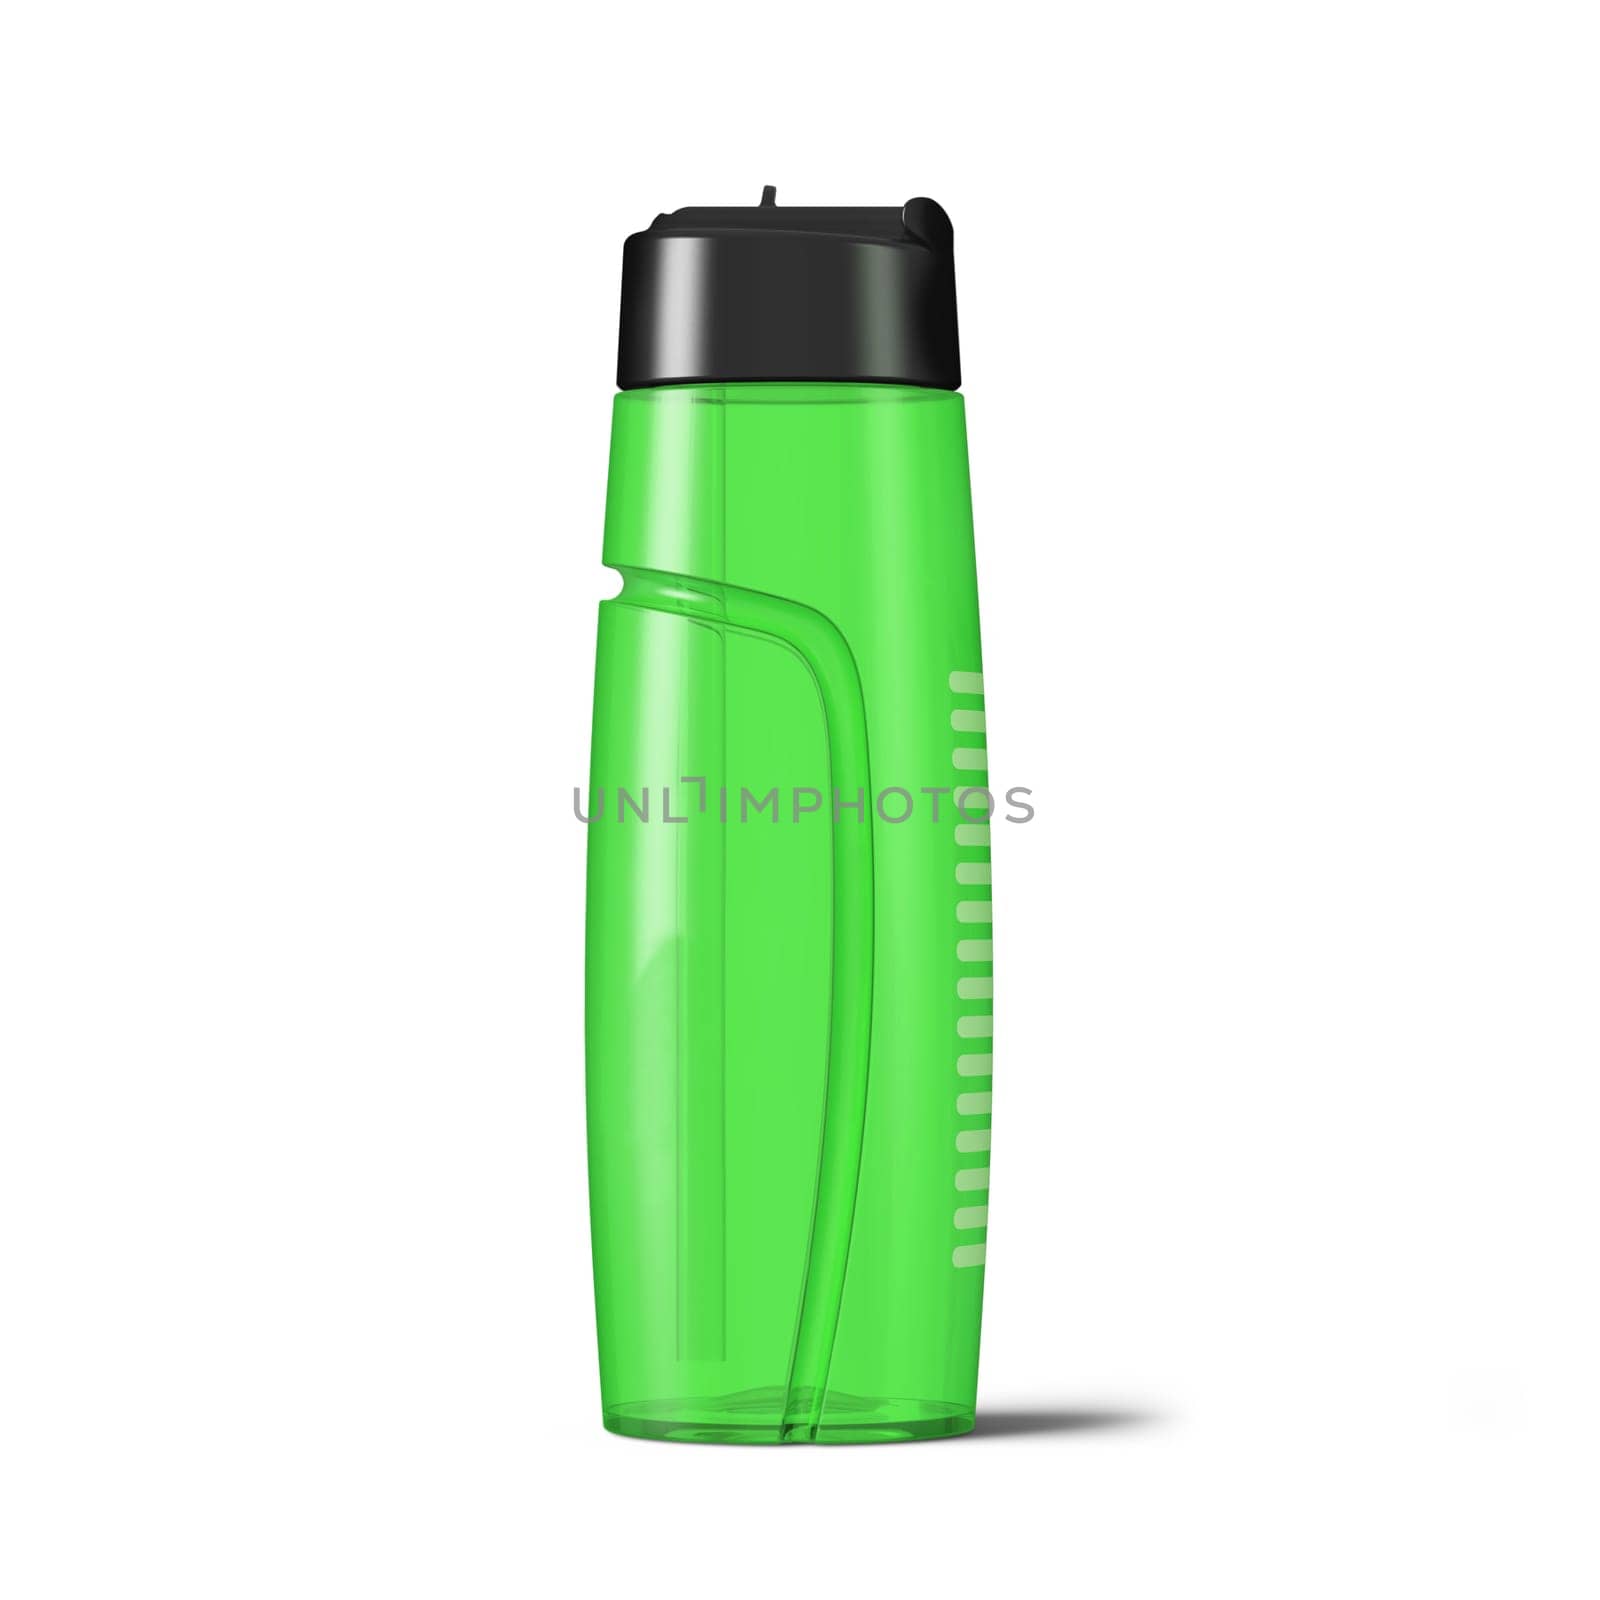 Green plastic bottle with white pattern for drinking water on a white background